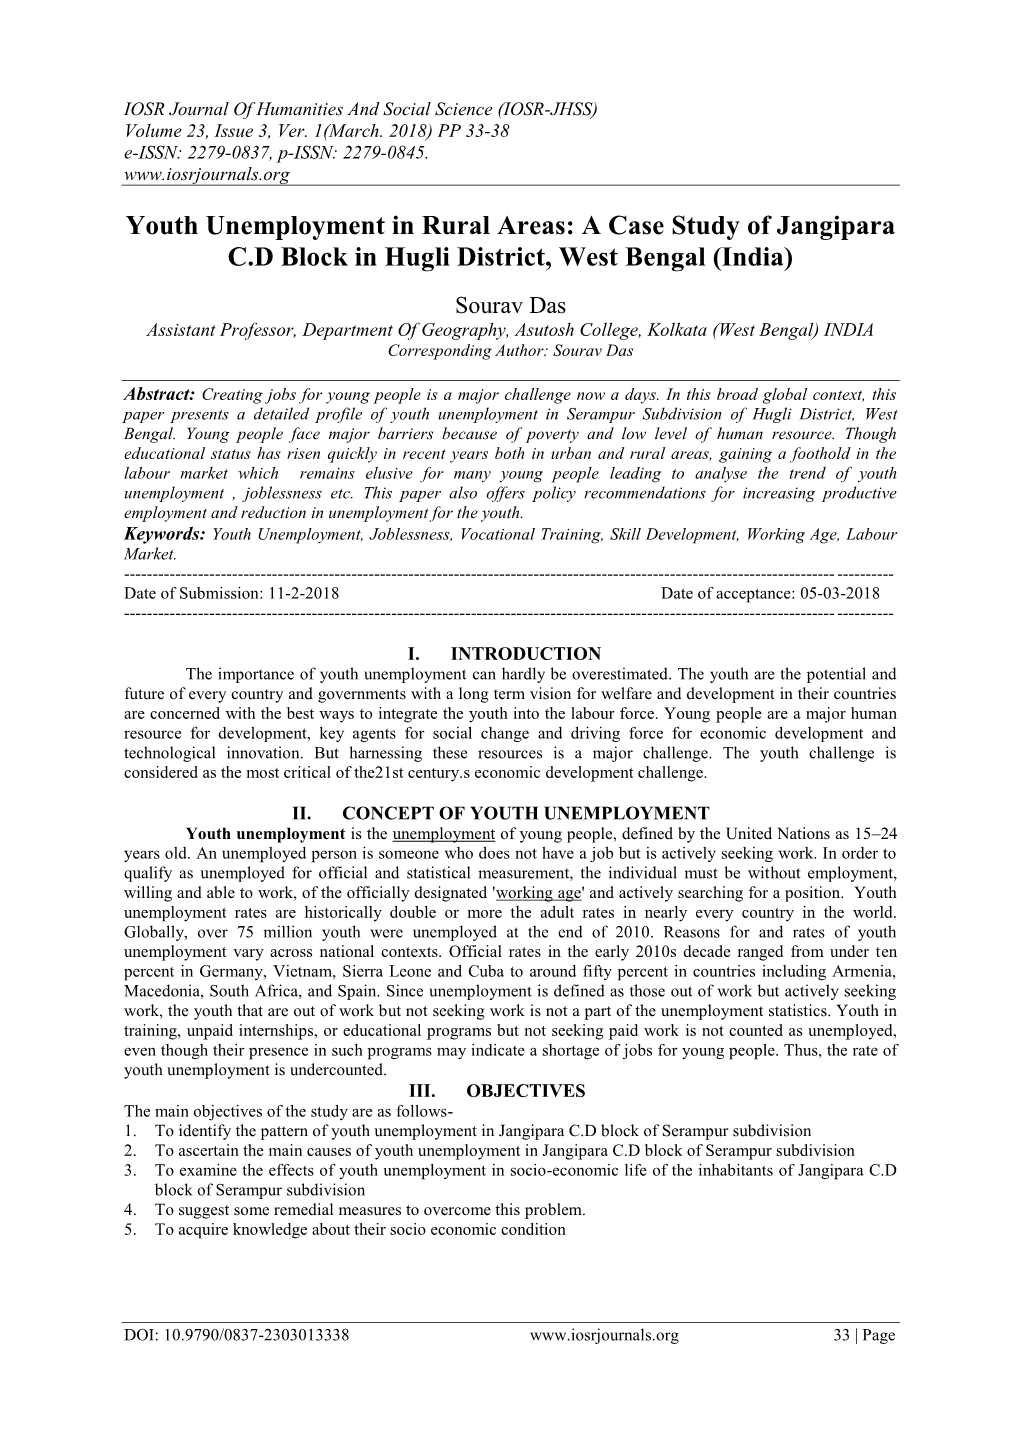 Youth Unemployment in Rural Areas: a Case Study of Jangipara C.D Block in Hugli District, West Bengal (India)